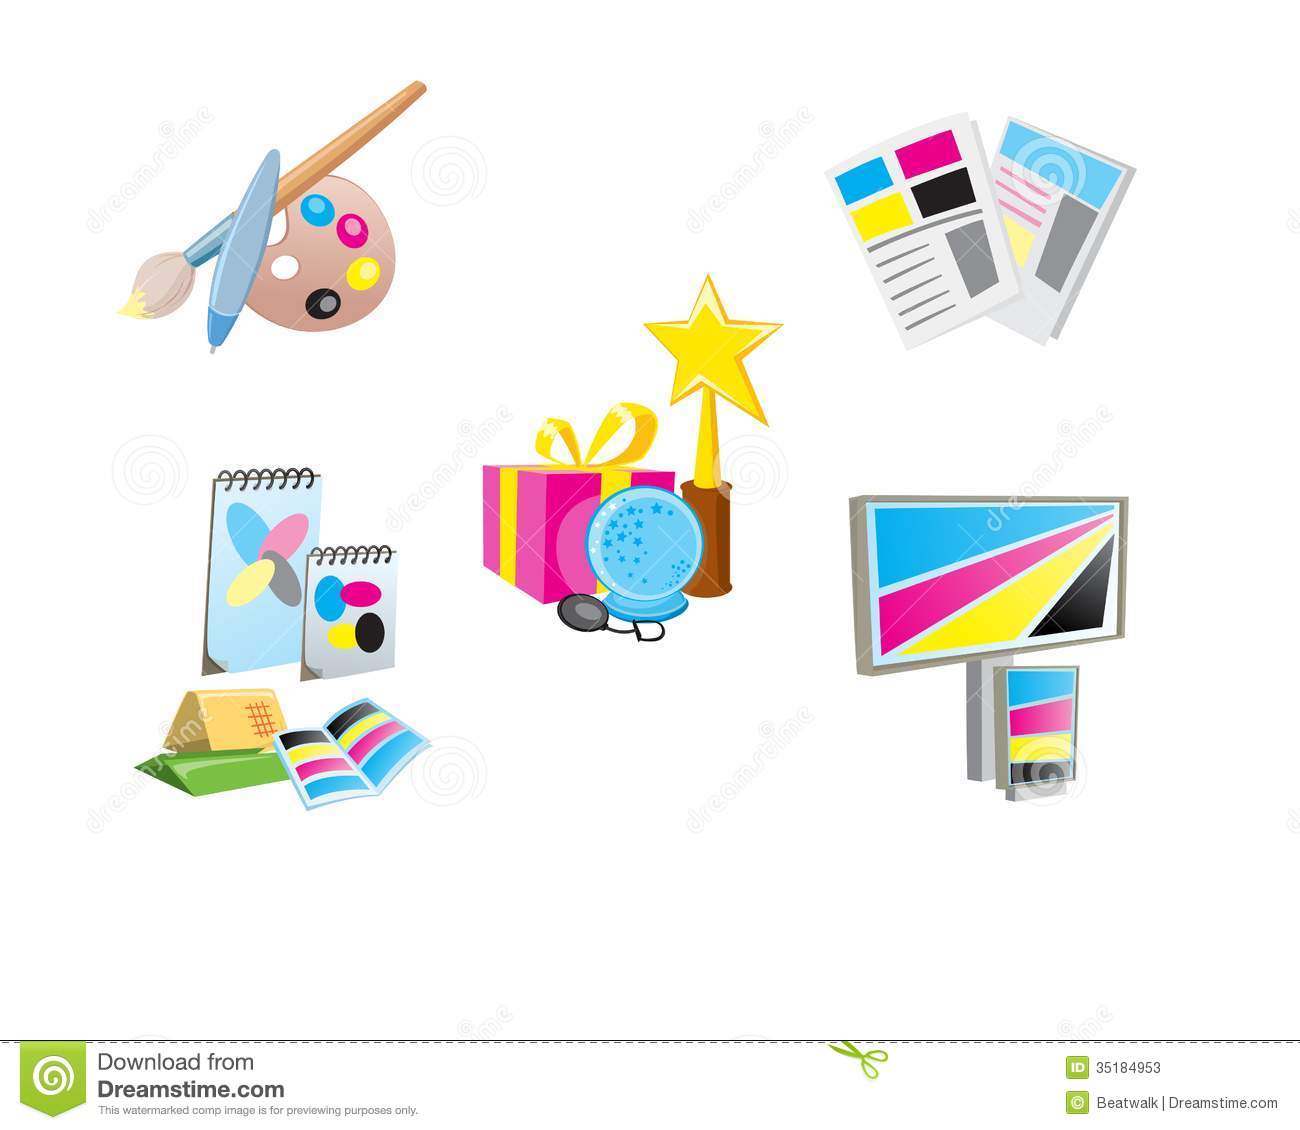 Promotional Items Stock Photos   Image  35184953